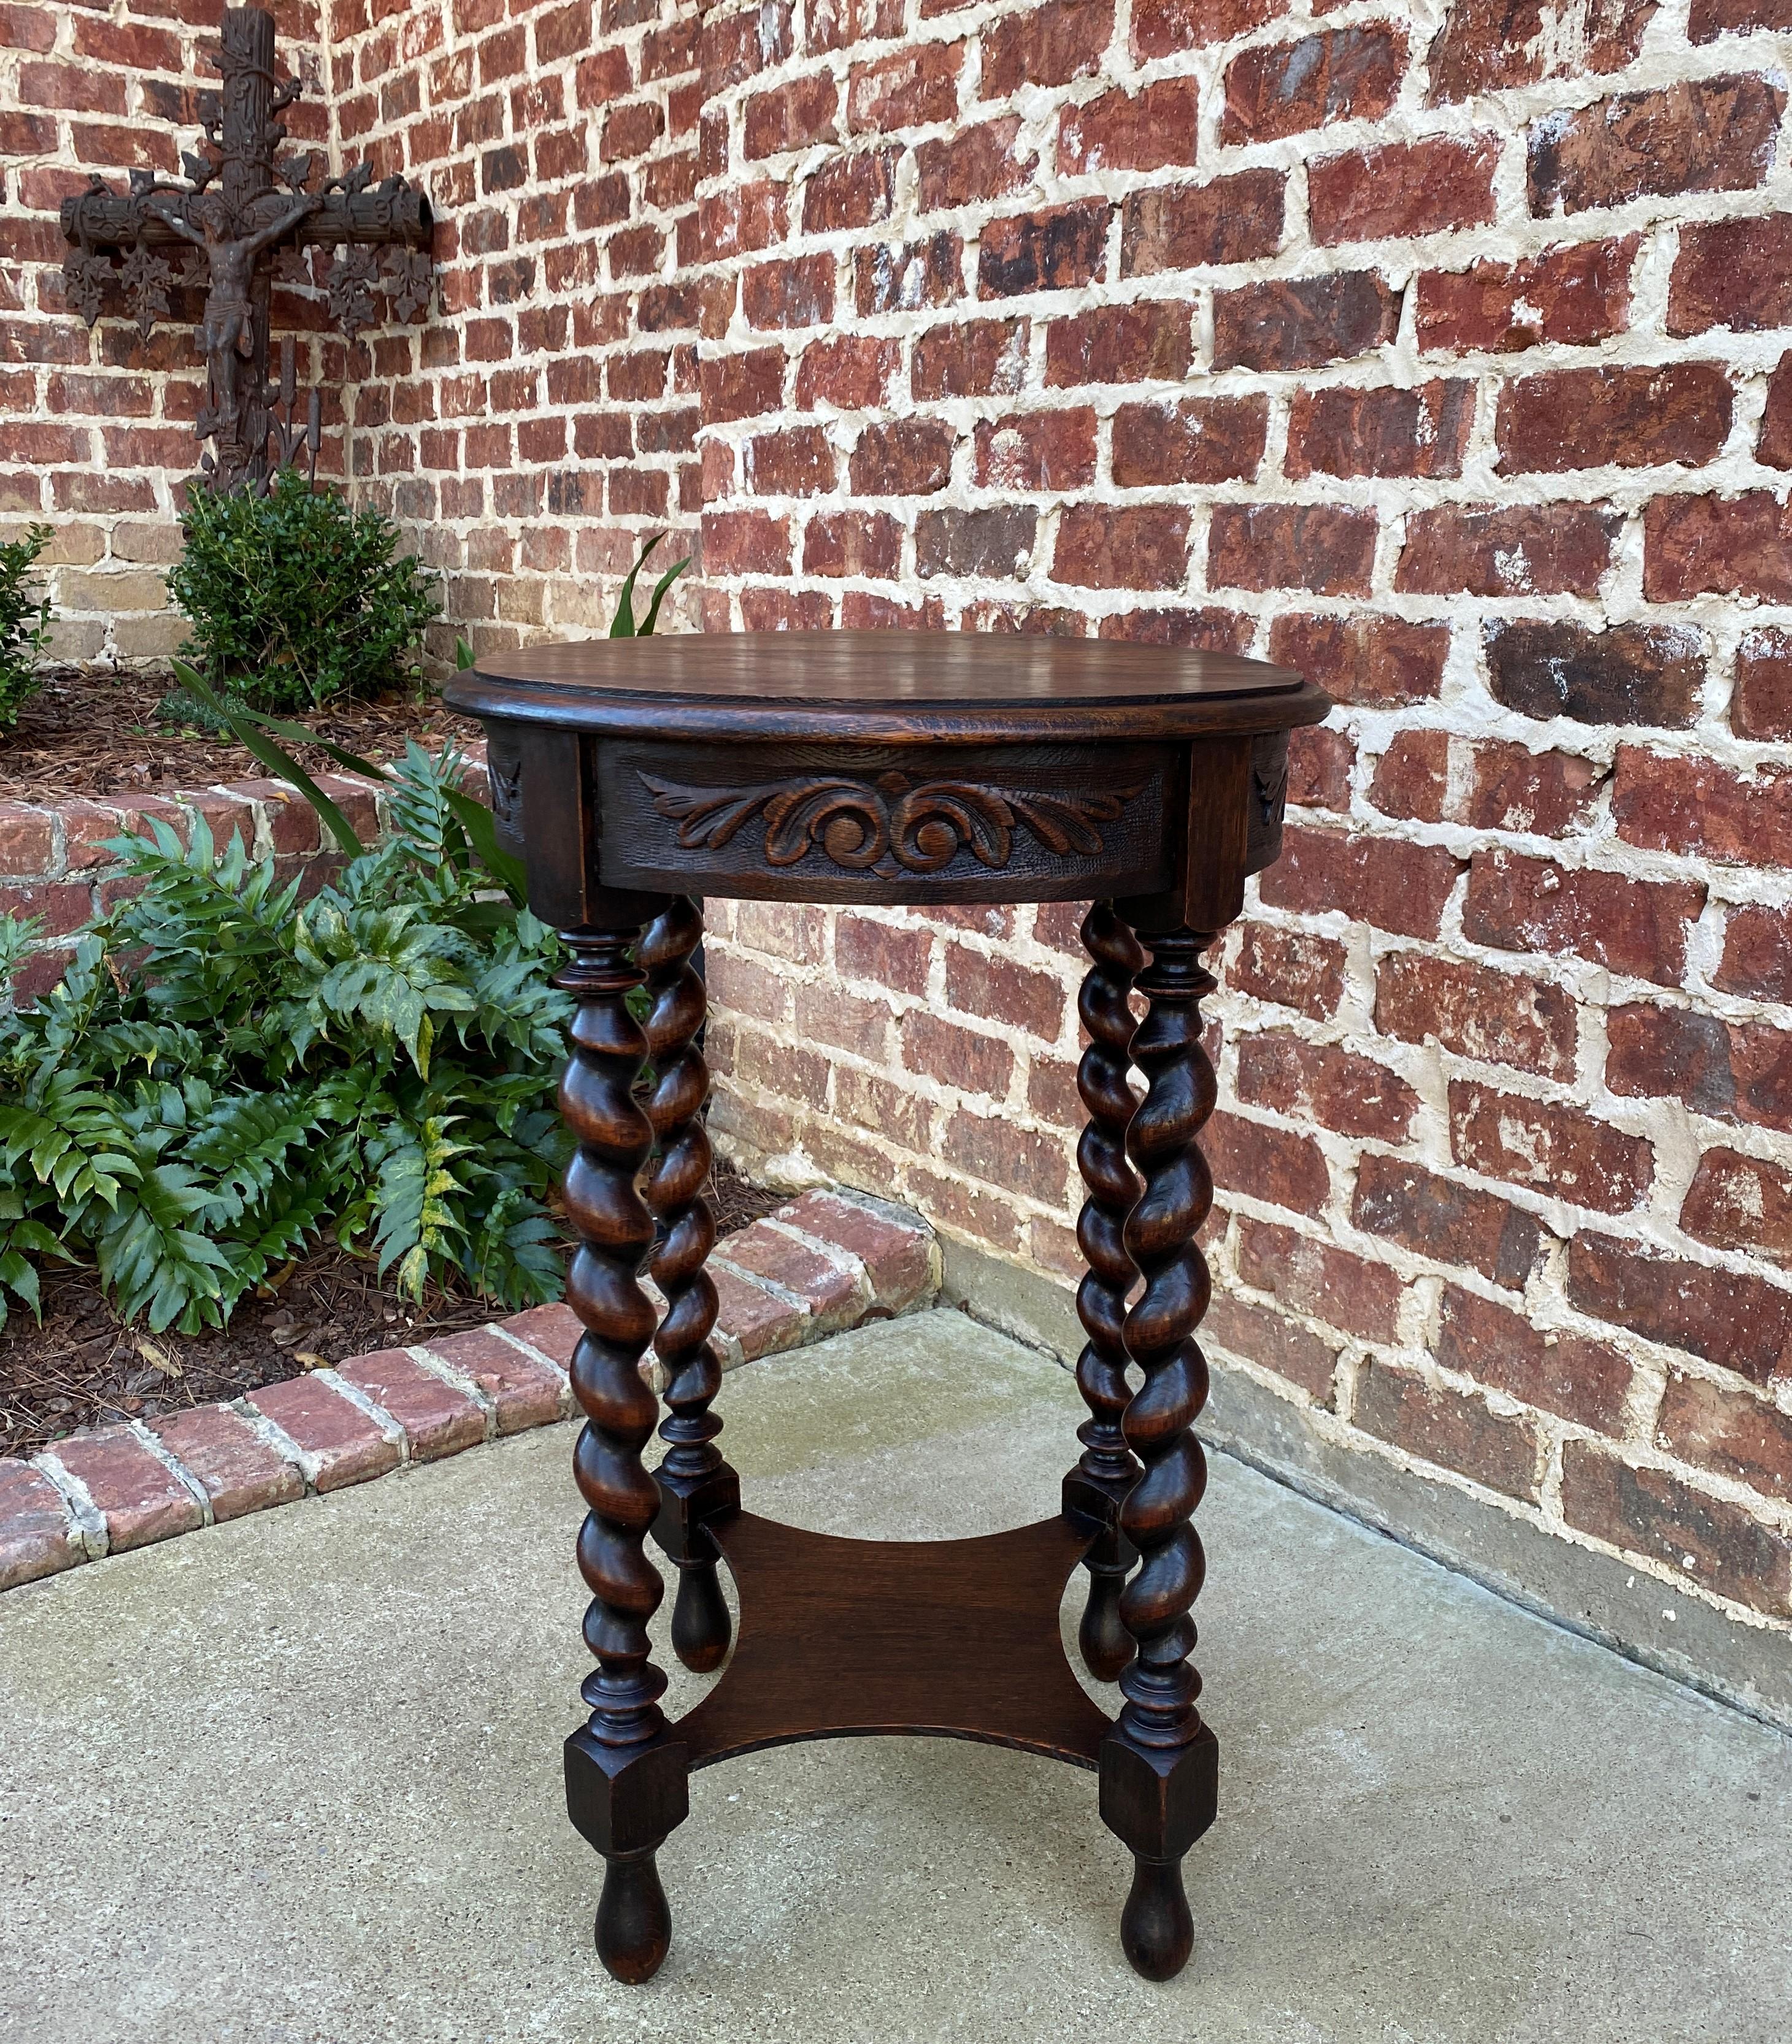 Antique English Round Table End Table Occasional Table Barley Twist Oak 2-Tier 10